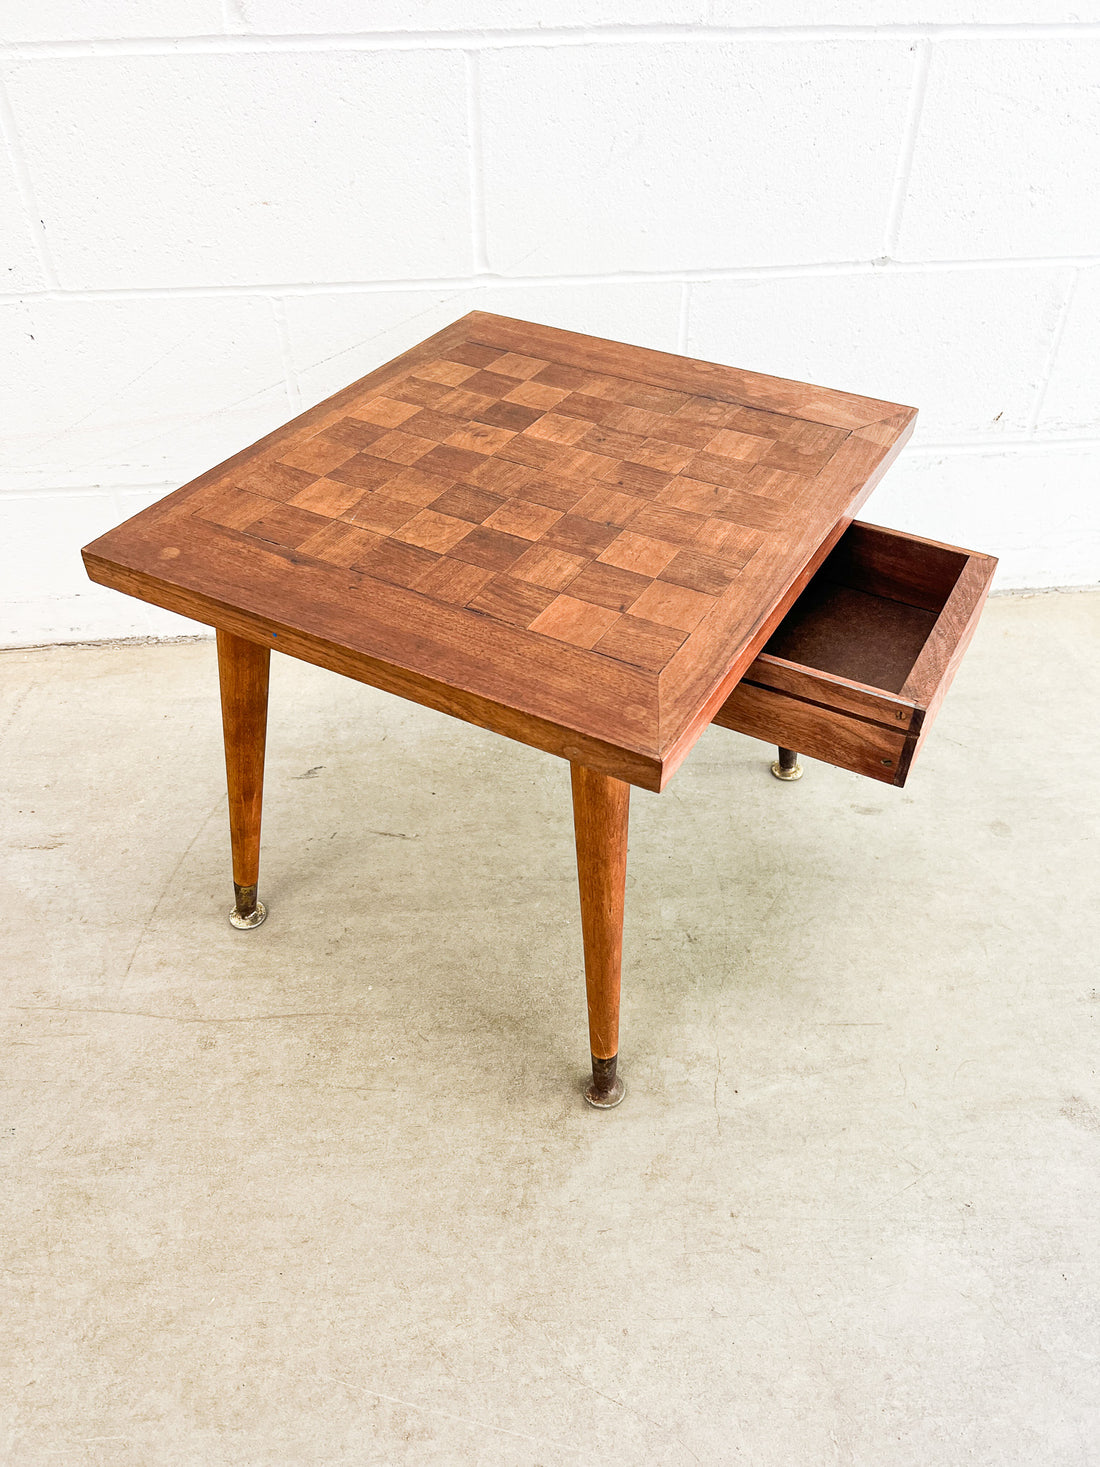 Midcentury Chess Board Table Hand Made